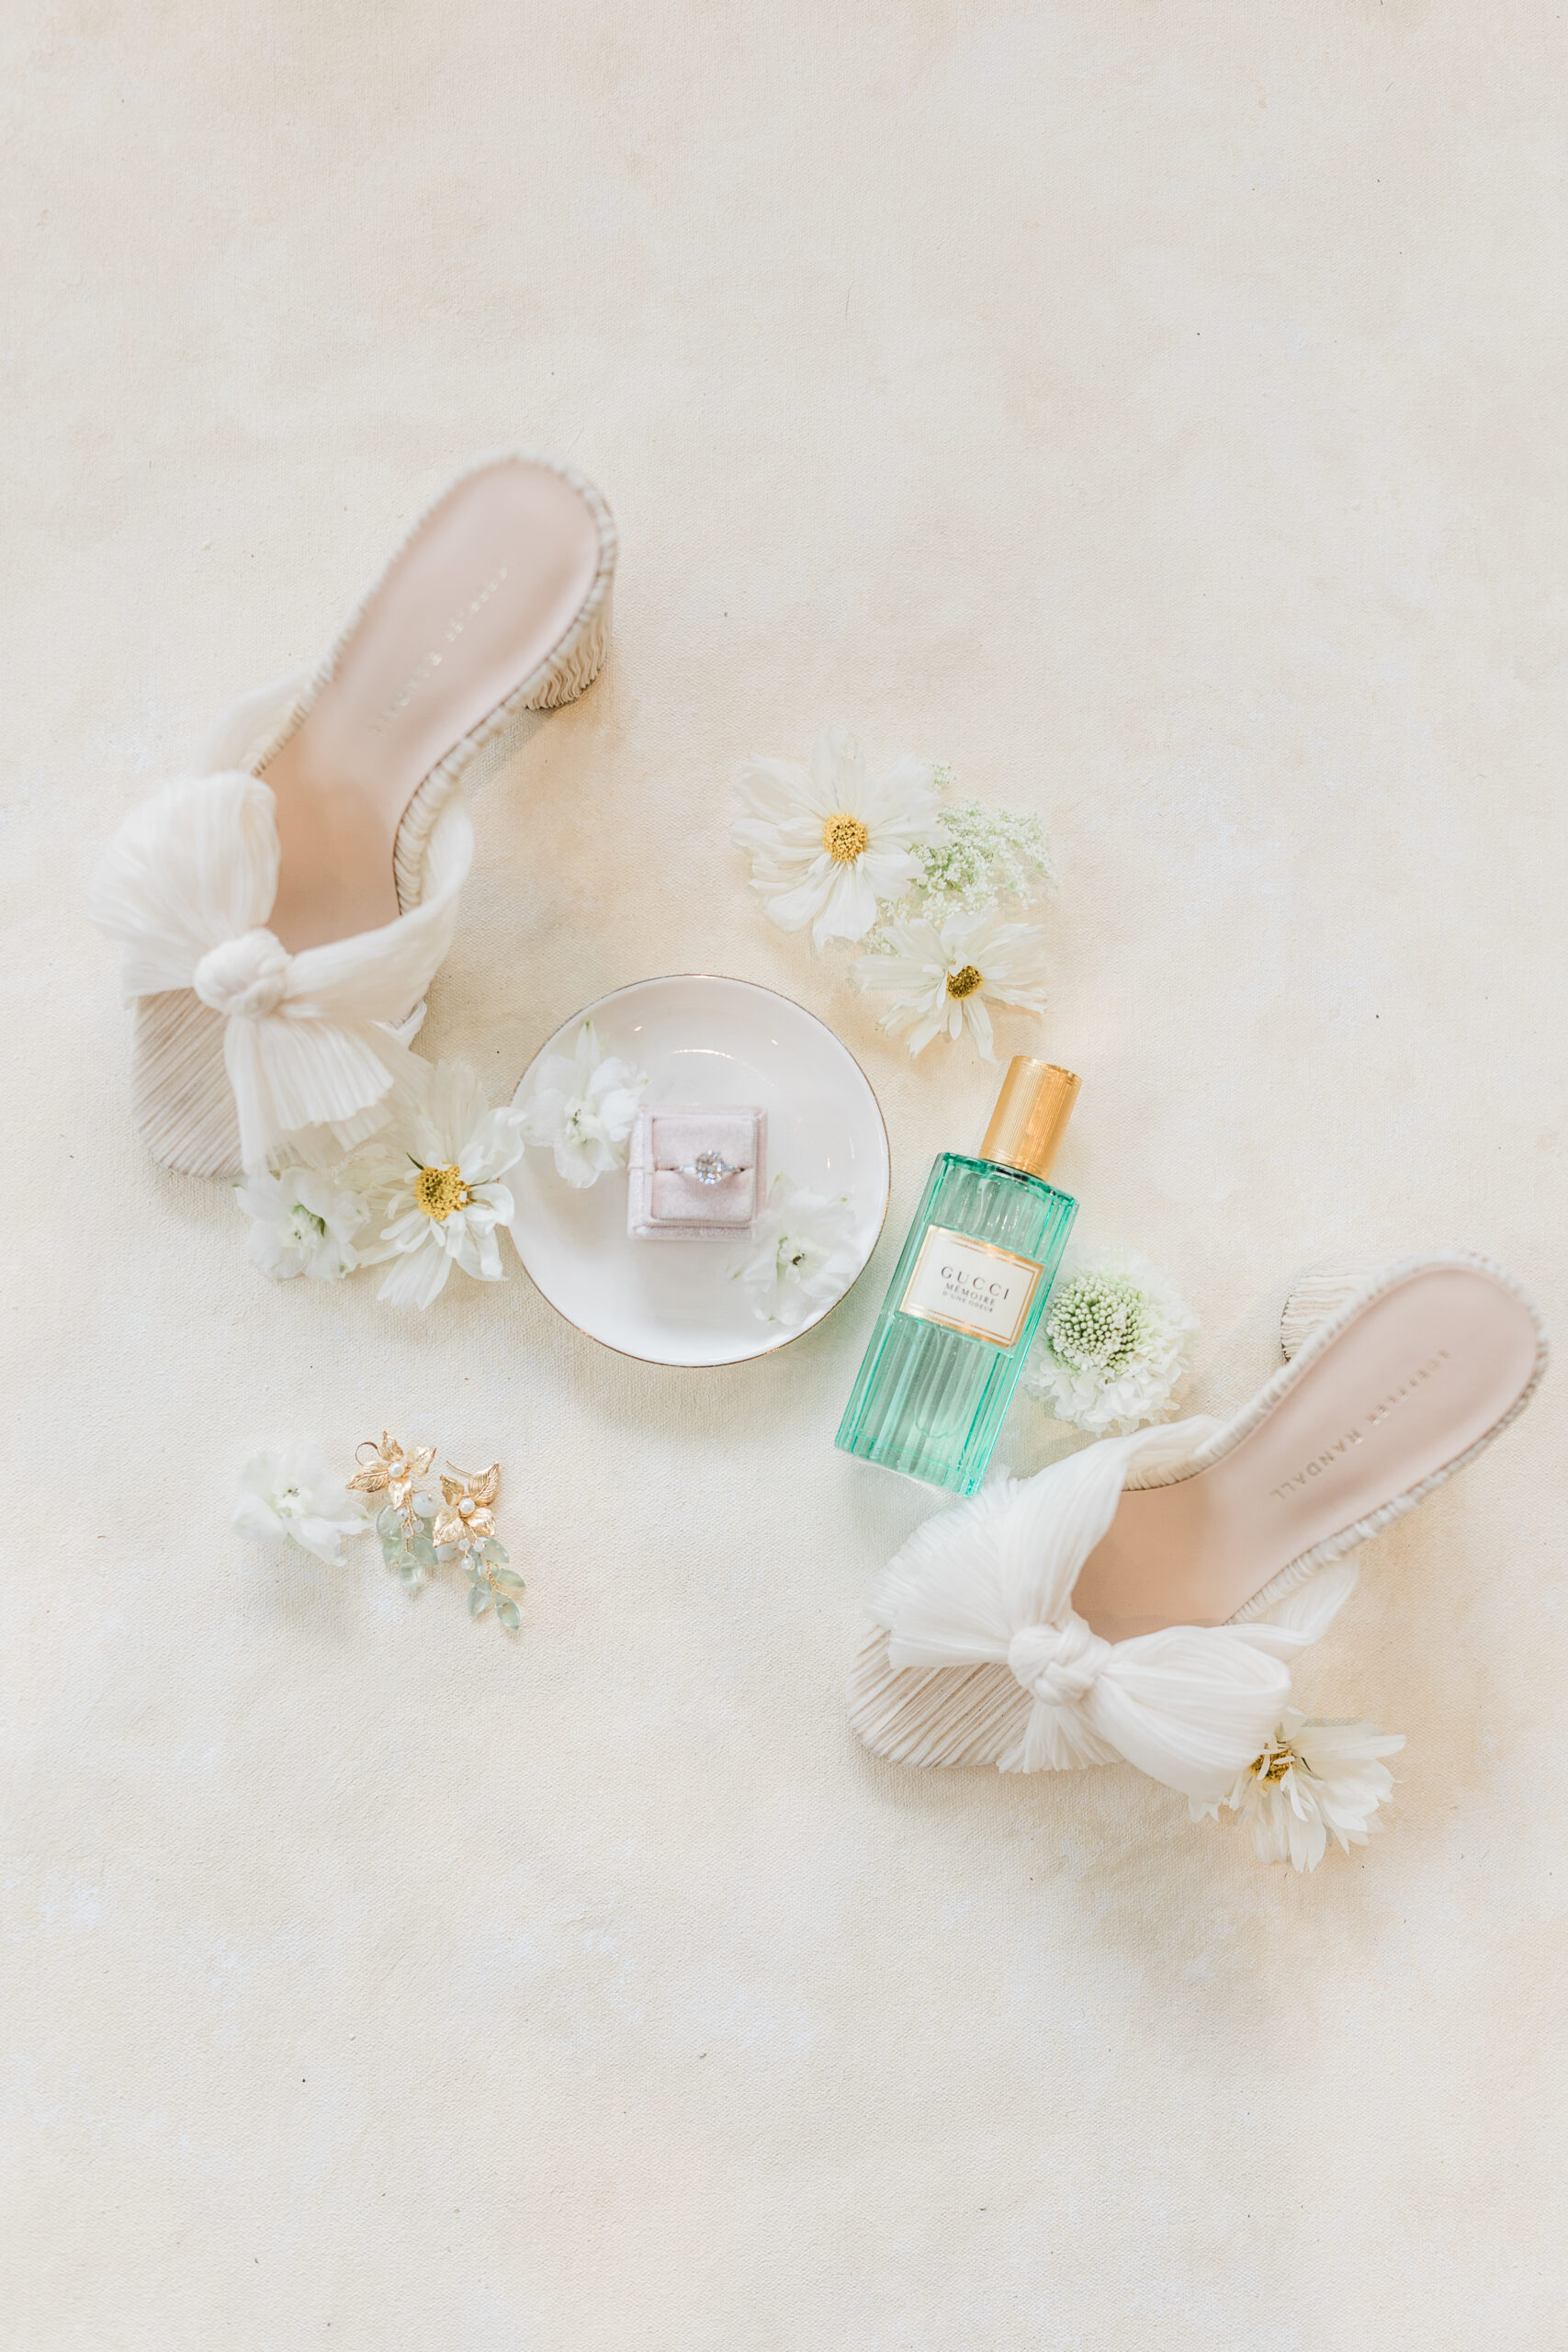 A pair of white shoes and a bottle of perfume on a white surface.